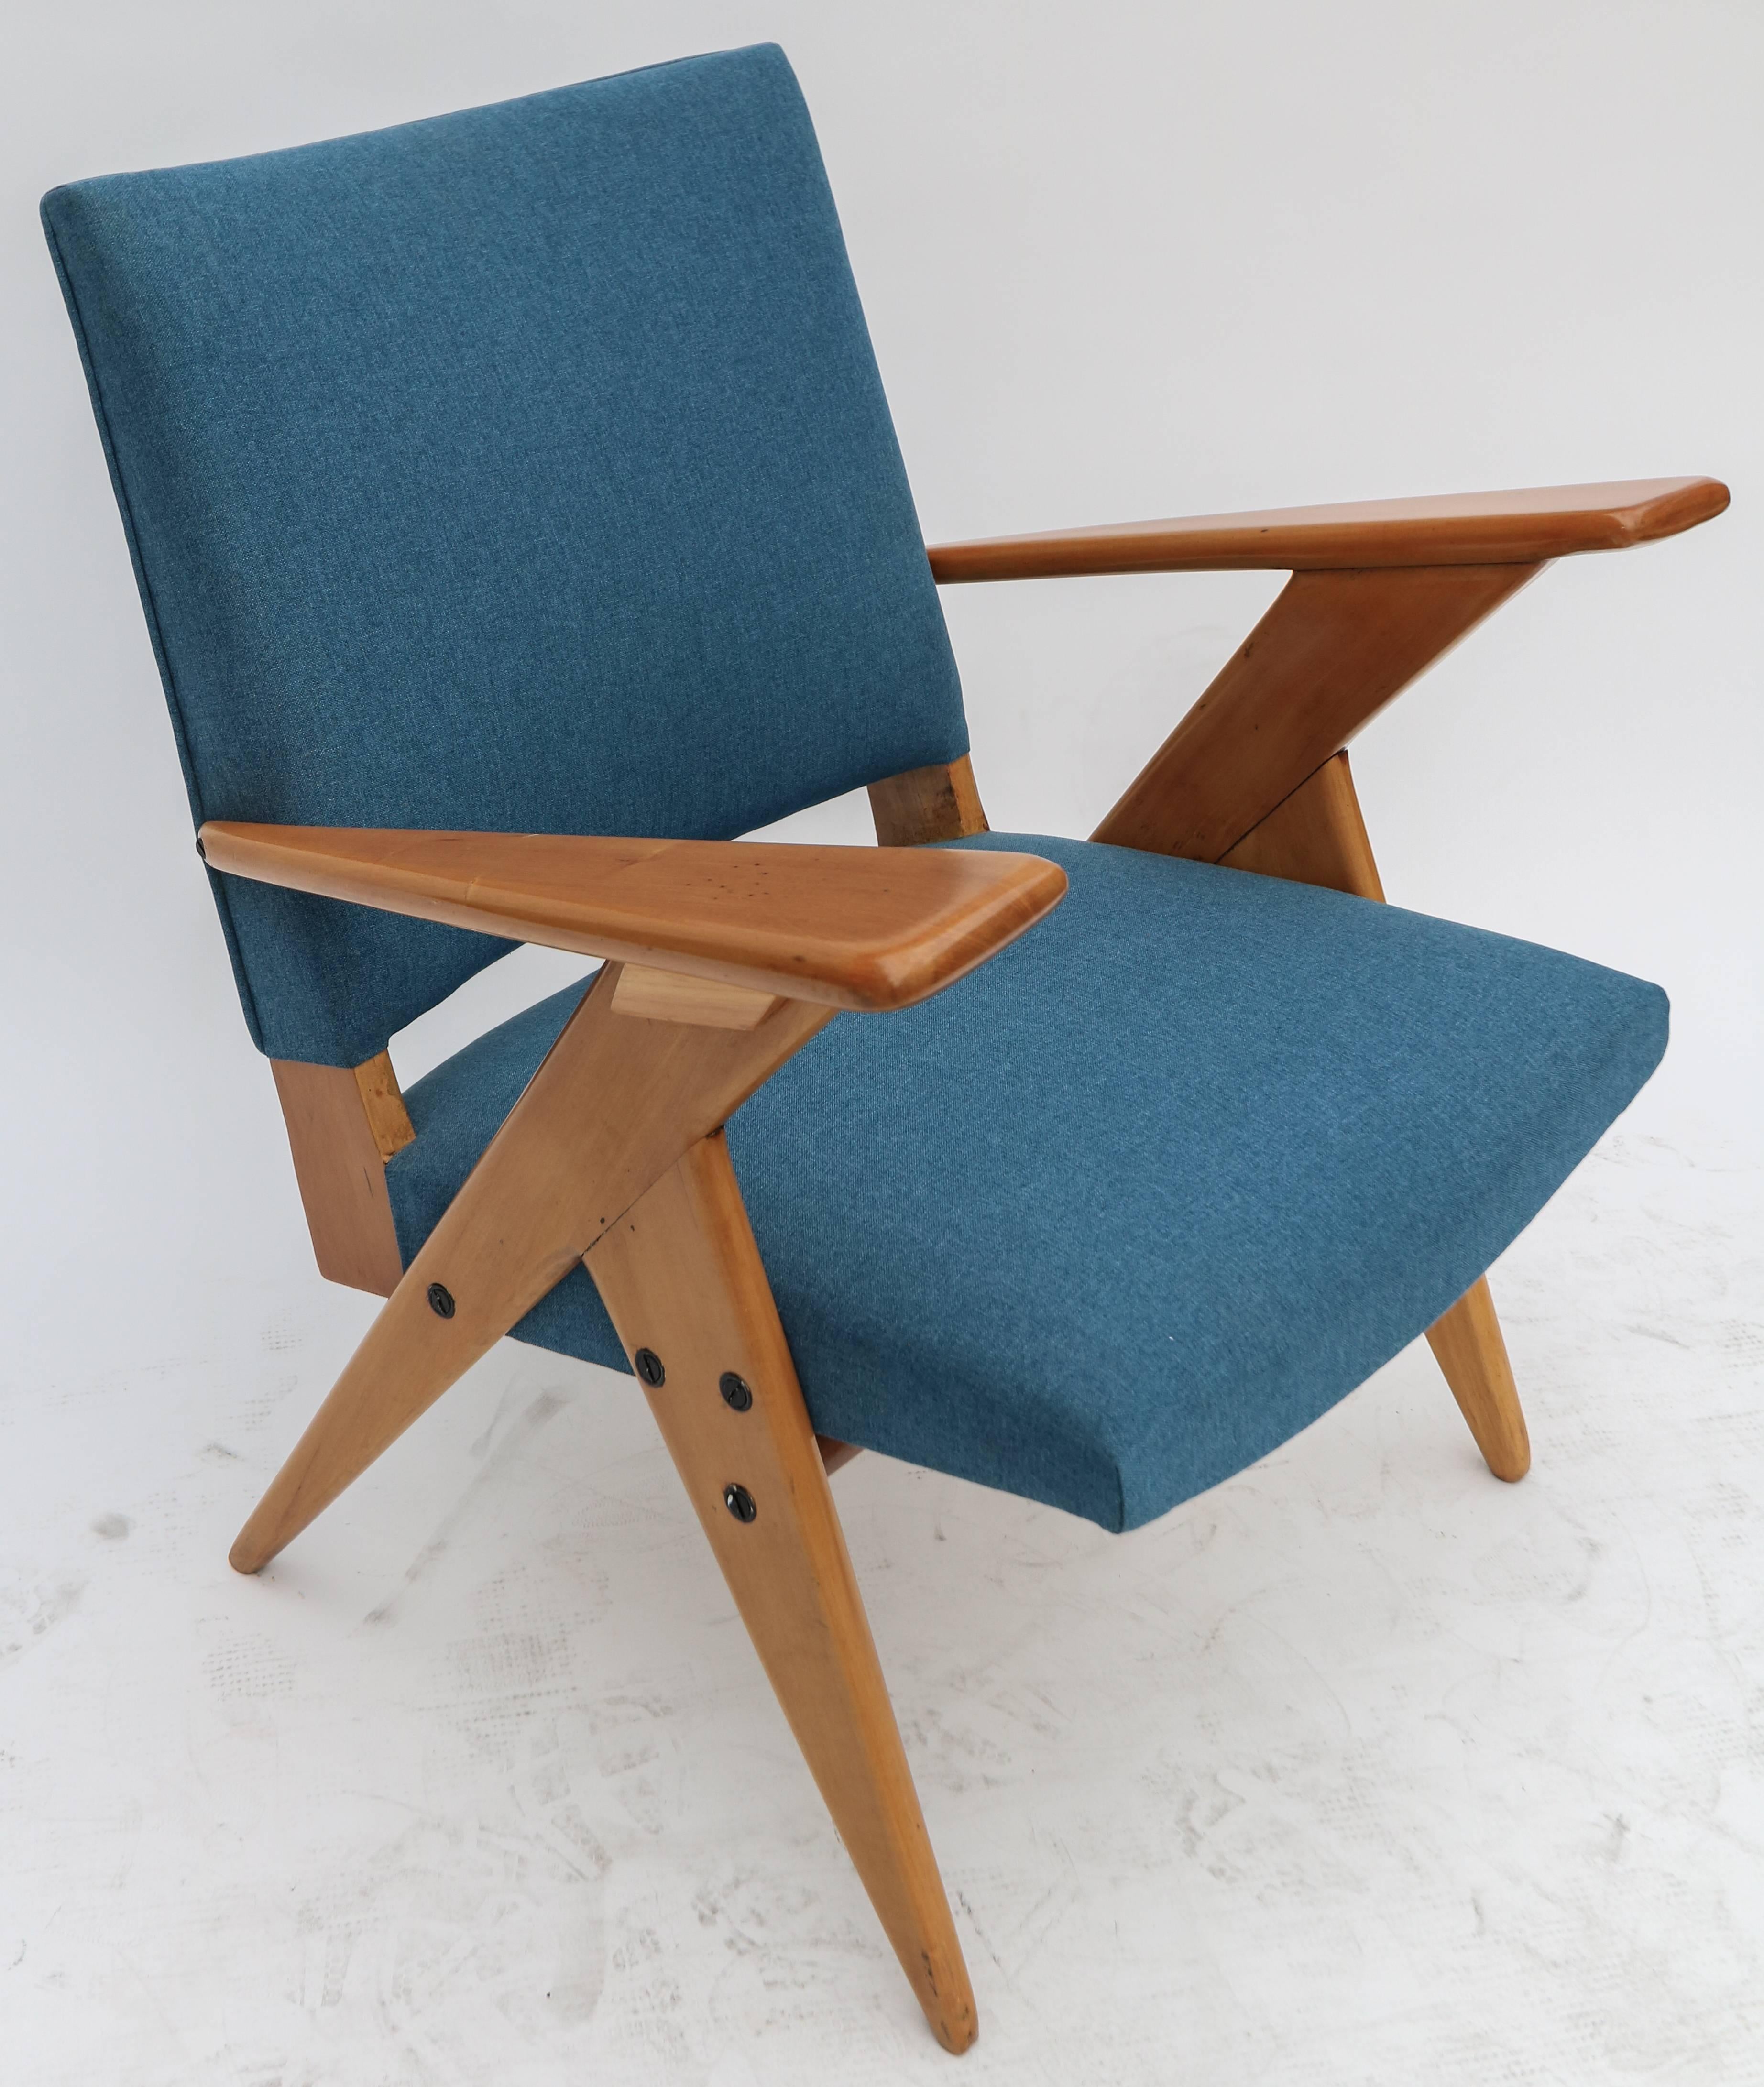 Pair of 1960s Brazilian caviuna armchairs by Zanine upholstered in blue linen.